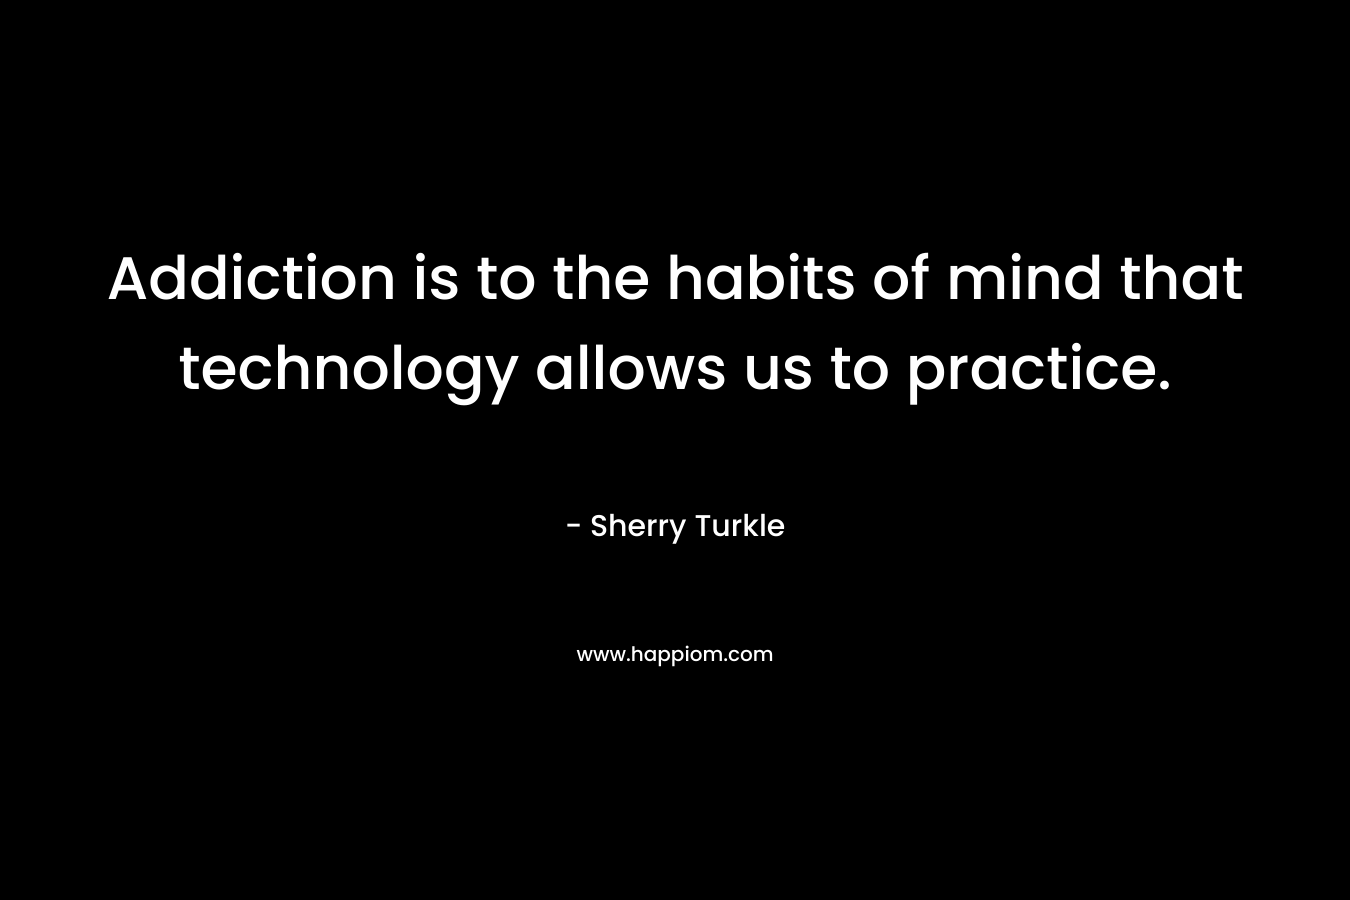 Addiction is to the habits of mind that technology allows us to practice.